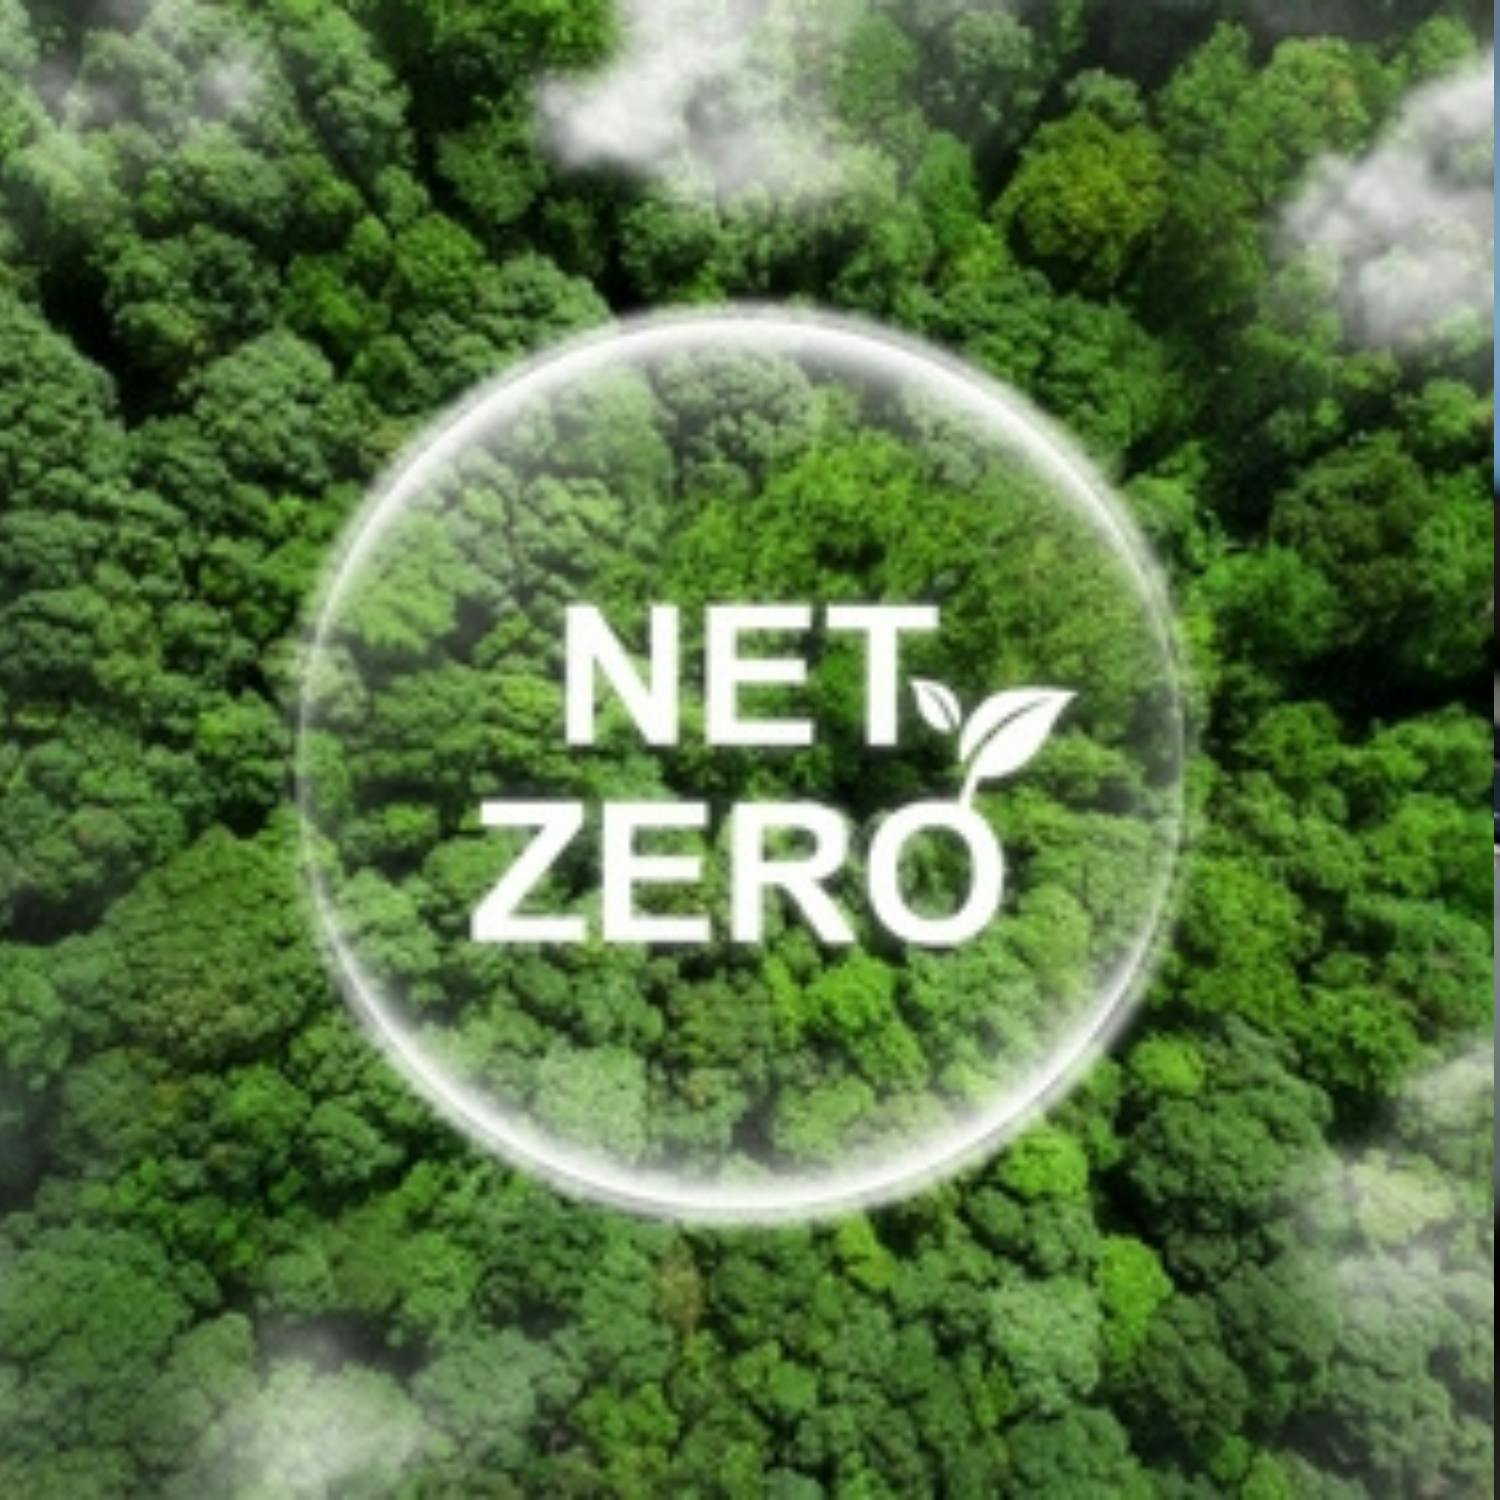 What would a net zero future look like?